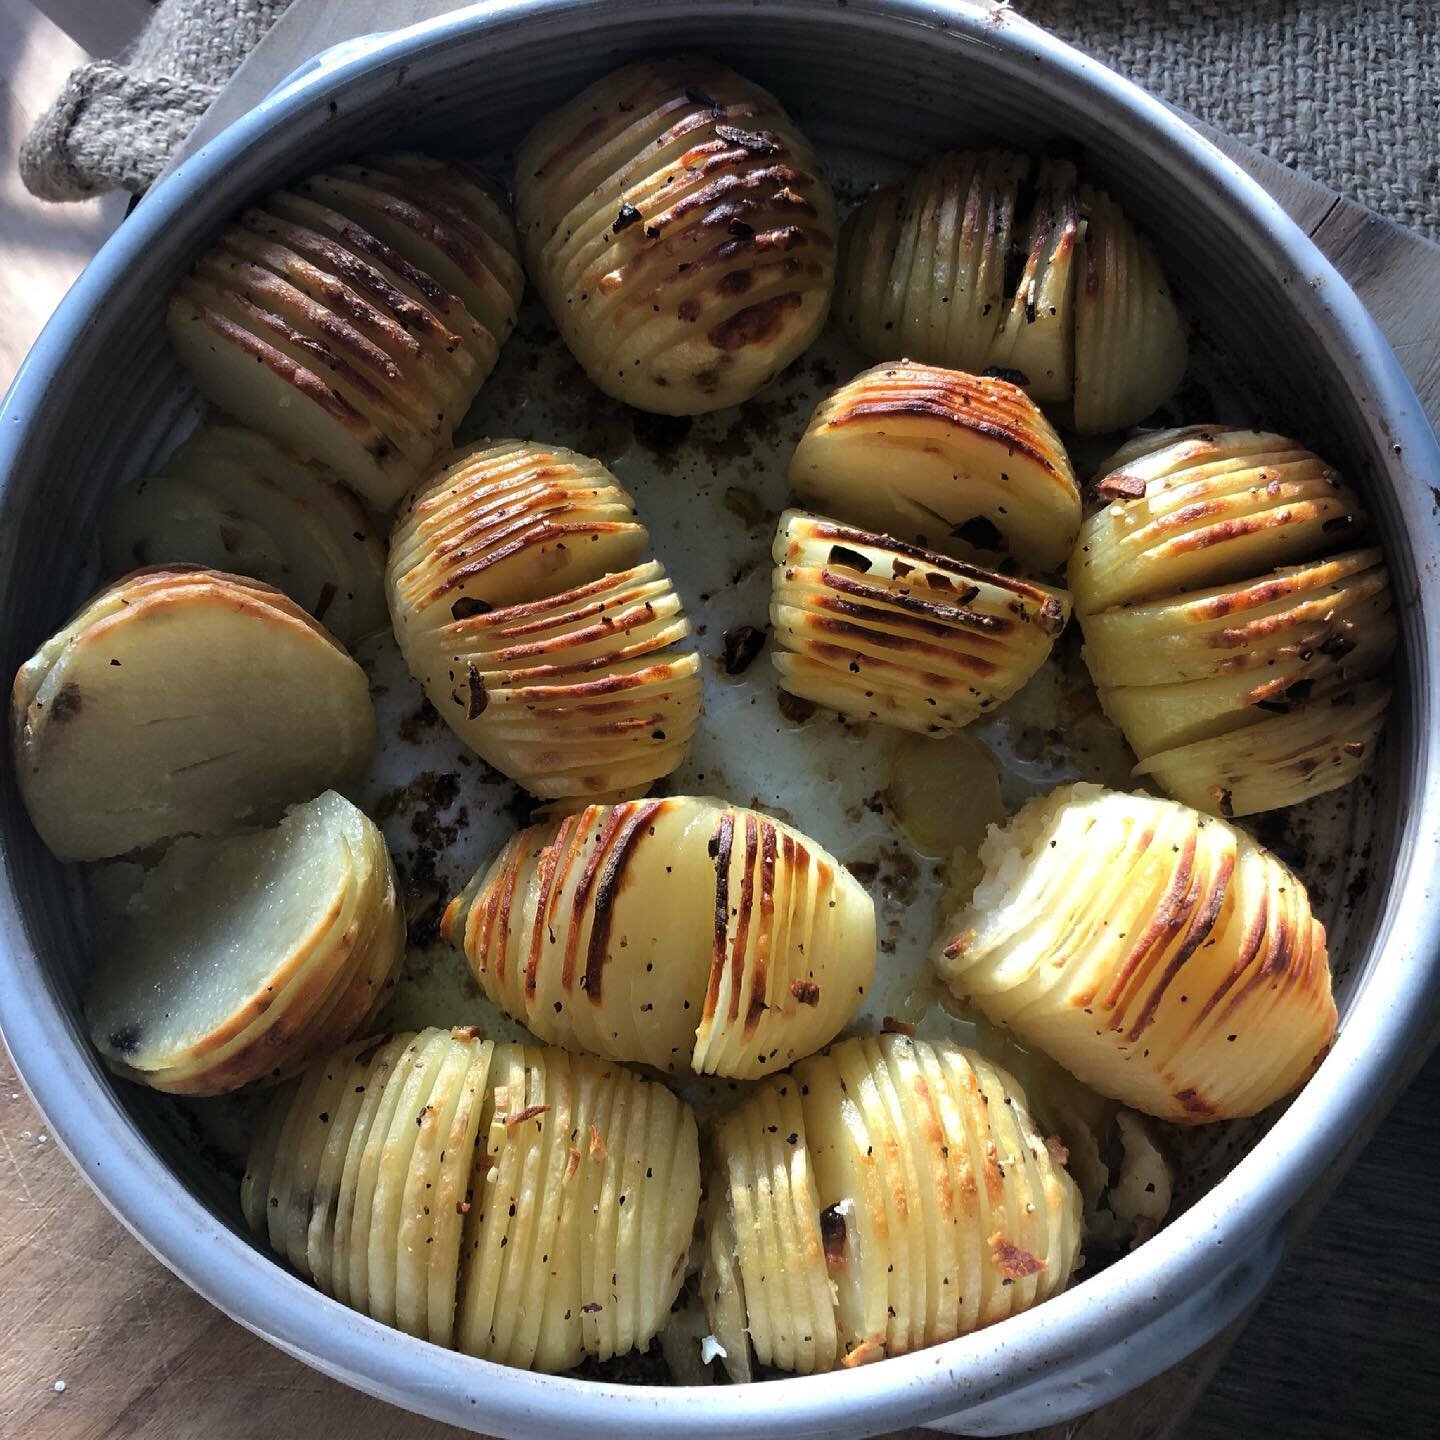 Hasselback potatoes from @joannagaines&rsquo;s cookbook Magnolia Table Vol 2. Fluffy on the inside and crunchy on the outside. We loved them! #familydinner #crunchypotatoes #roastedpotatoes #sidedish #magnoliatablecookbook #eatrealfood #intuitiveeati